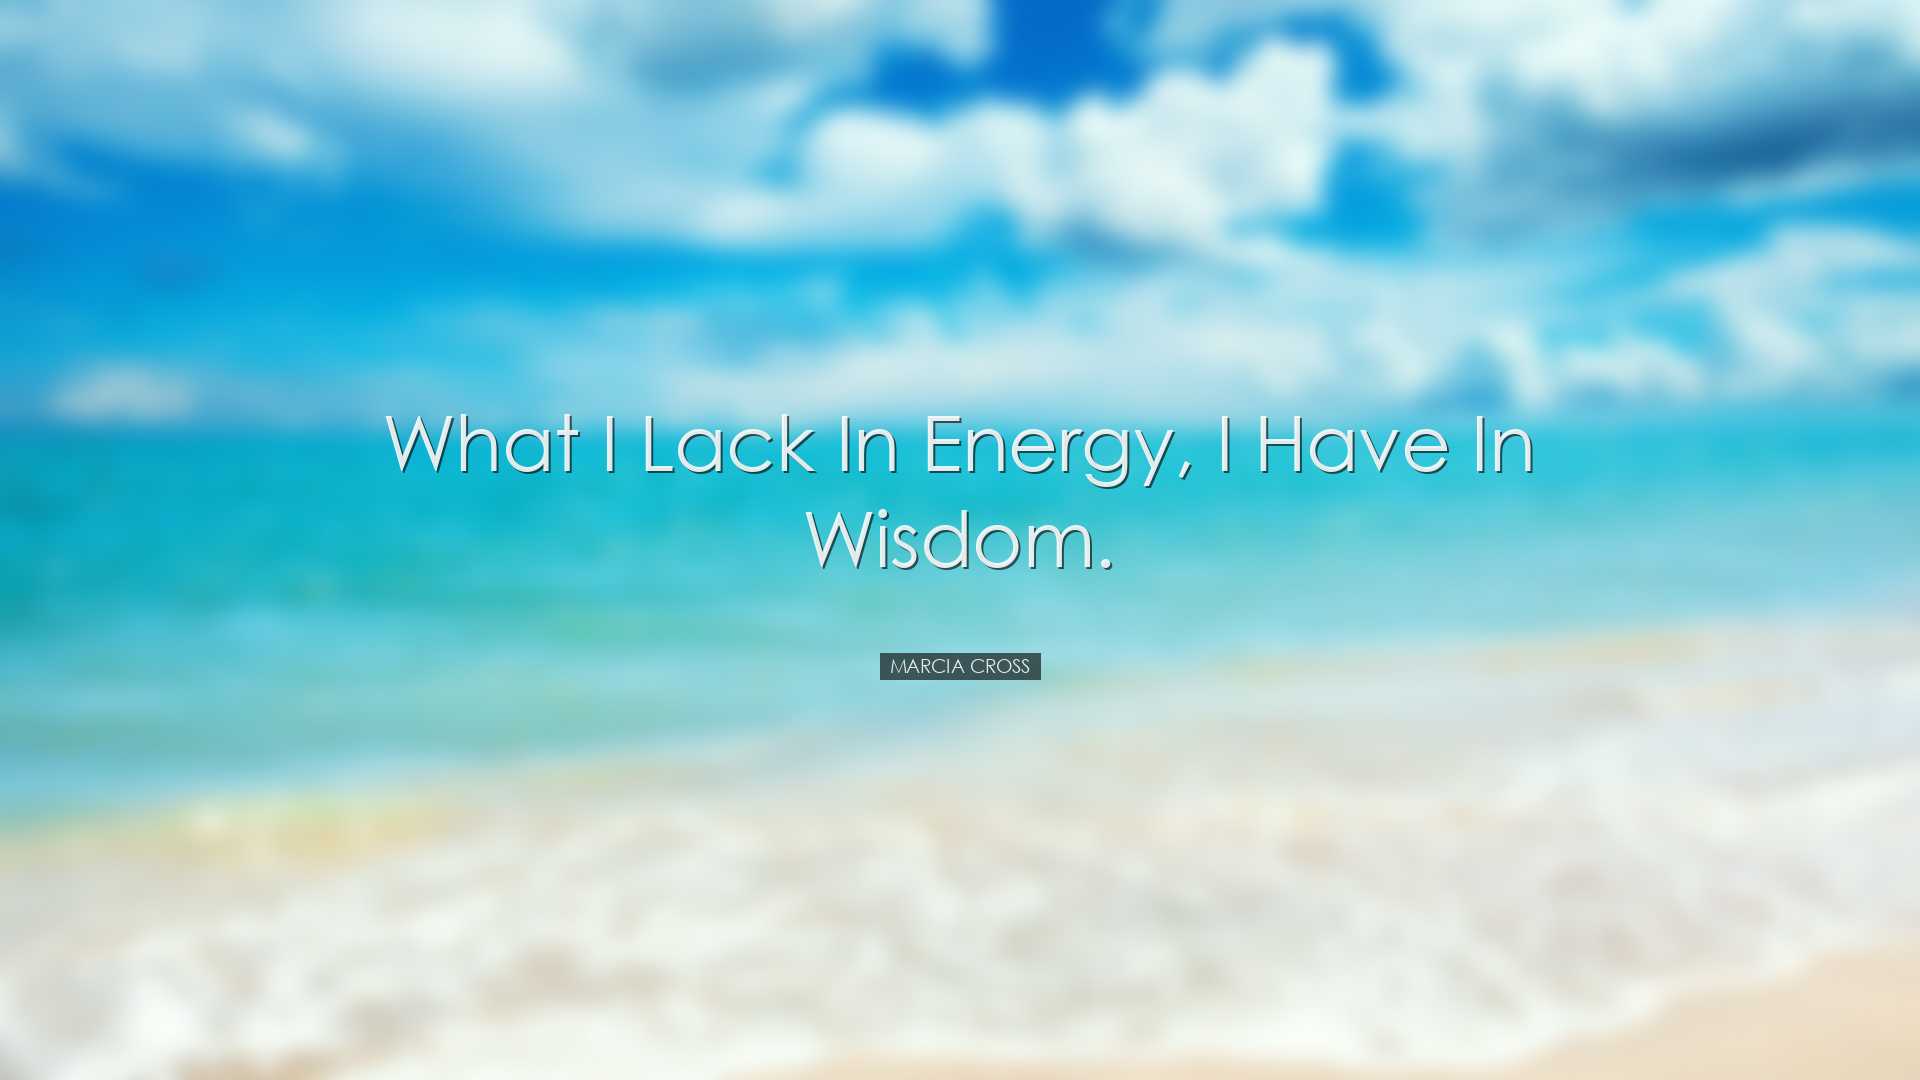 What I lack in energy, I have in wisdom. - Marcia Cross